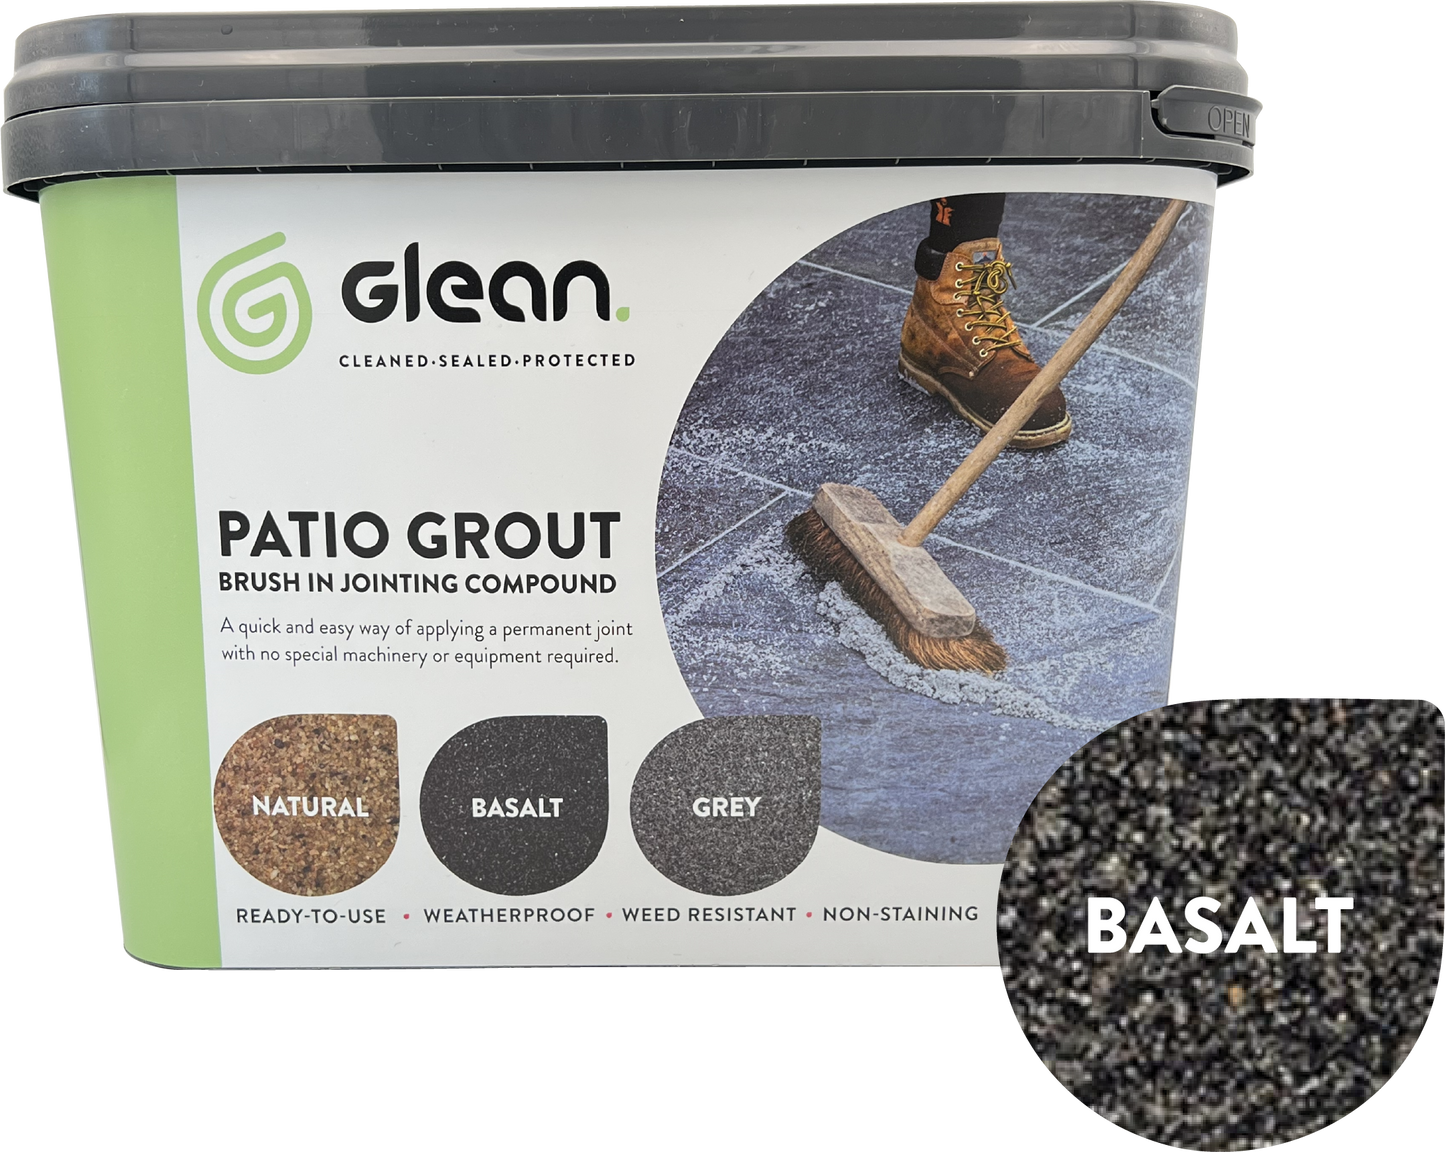 Patio Grout - Brush In Jointing Compound | GLEAN